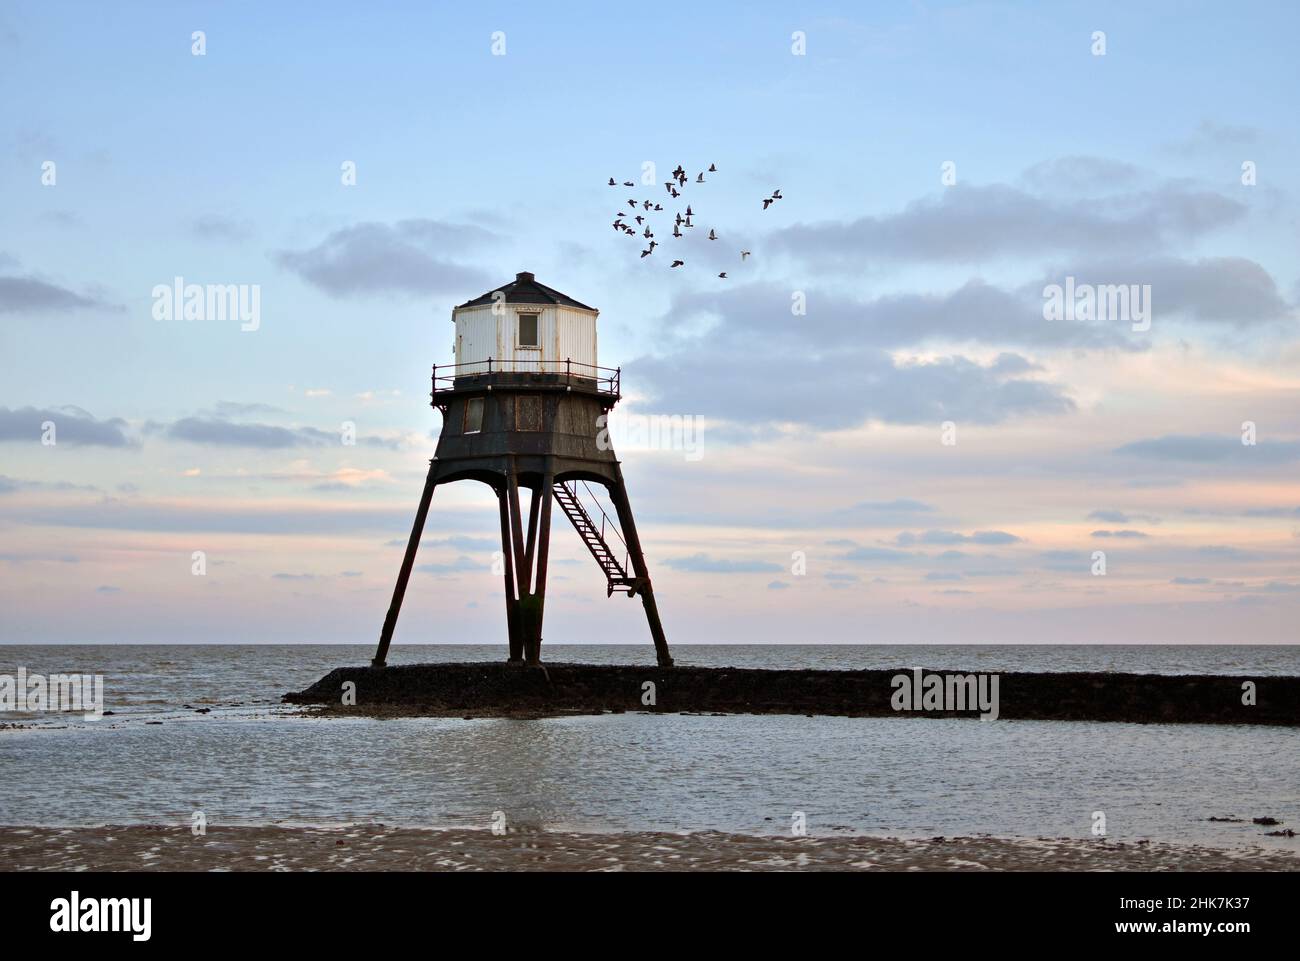 A flock of seagulls fly above the Victorian Dovercourt lighthouse in the beautiful colourful evening sky. Harwich & Dovercourt, North Essex Coast, UK Stock Photo